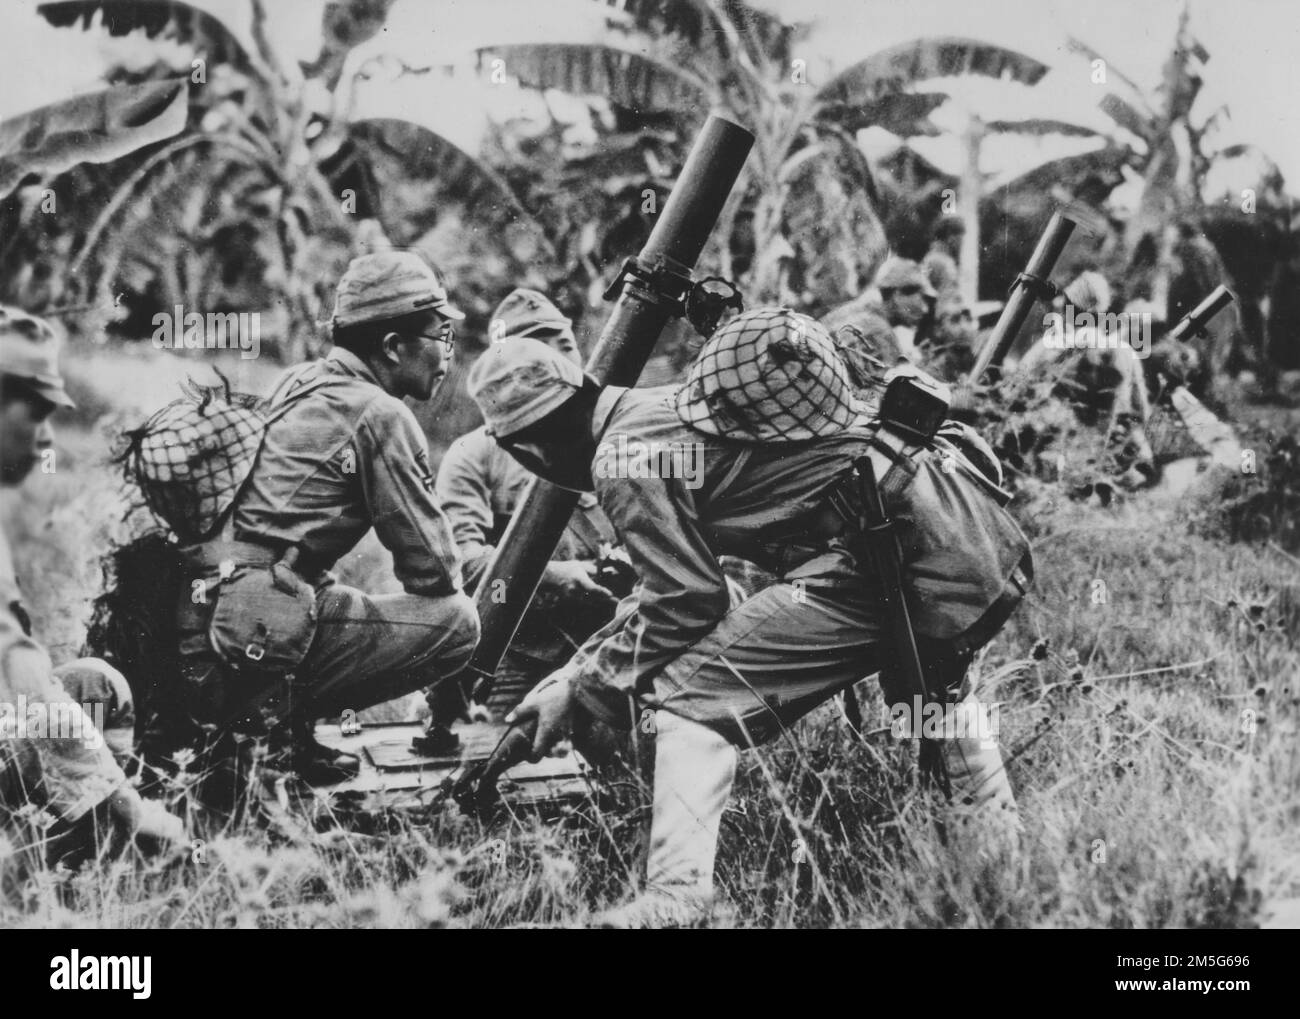 Pacific War, 1941-1945. An Imperial Japanese Navy mortar crew garrisoned on Saipan trains in anticipation of an attack on the island from Allied Forces, May 1944. Stock Photo